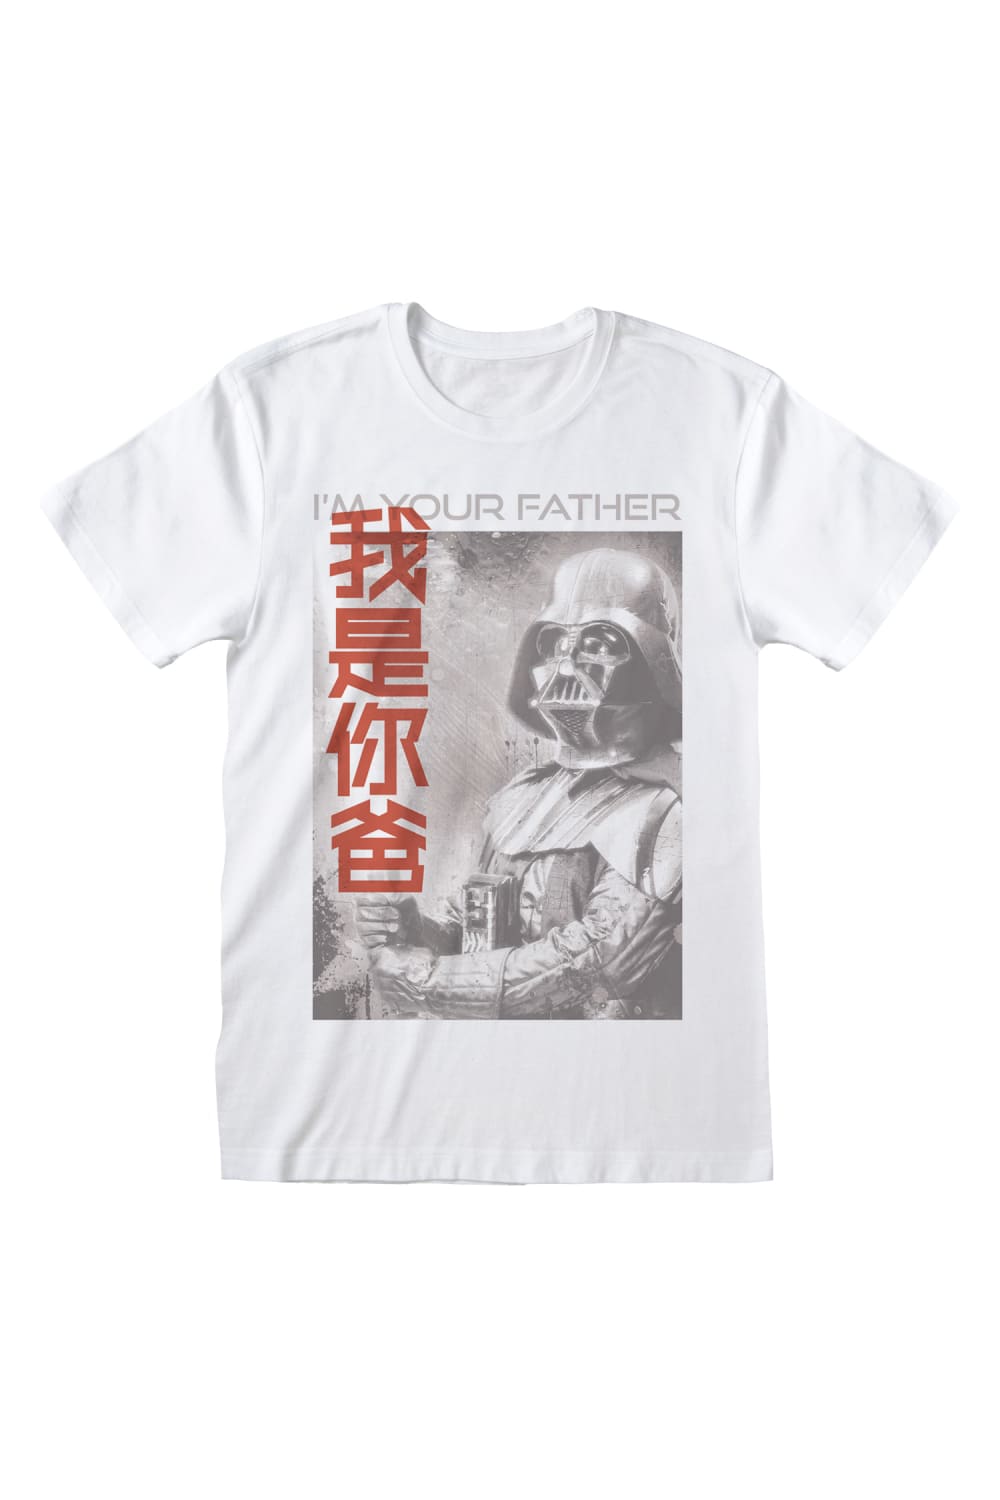 Star Wars Unisex Adult I Am Your Father T-Shirt (White)